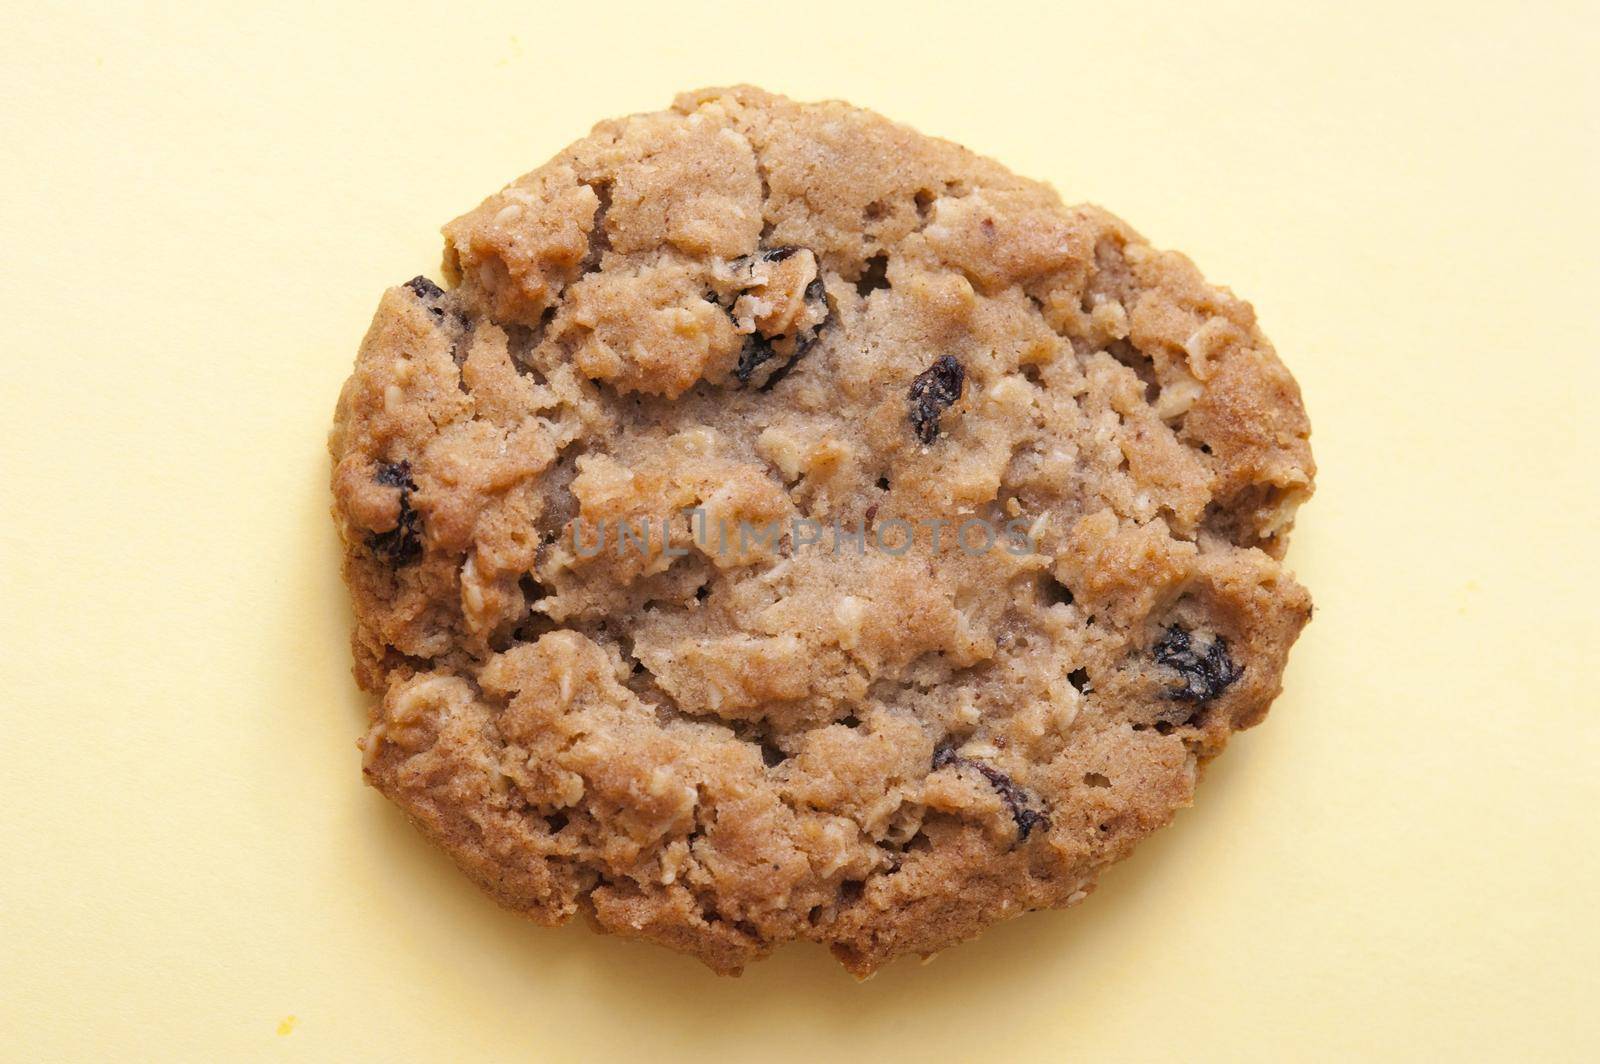 Single round crunchy raisin cookie made with oats on a yellow background, high angle view